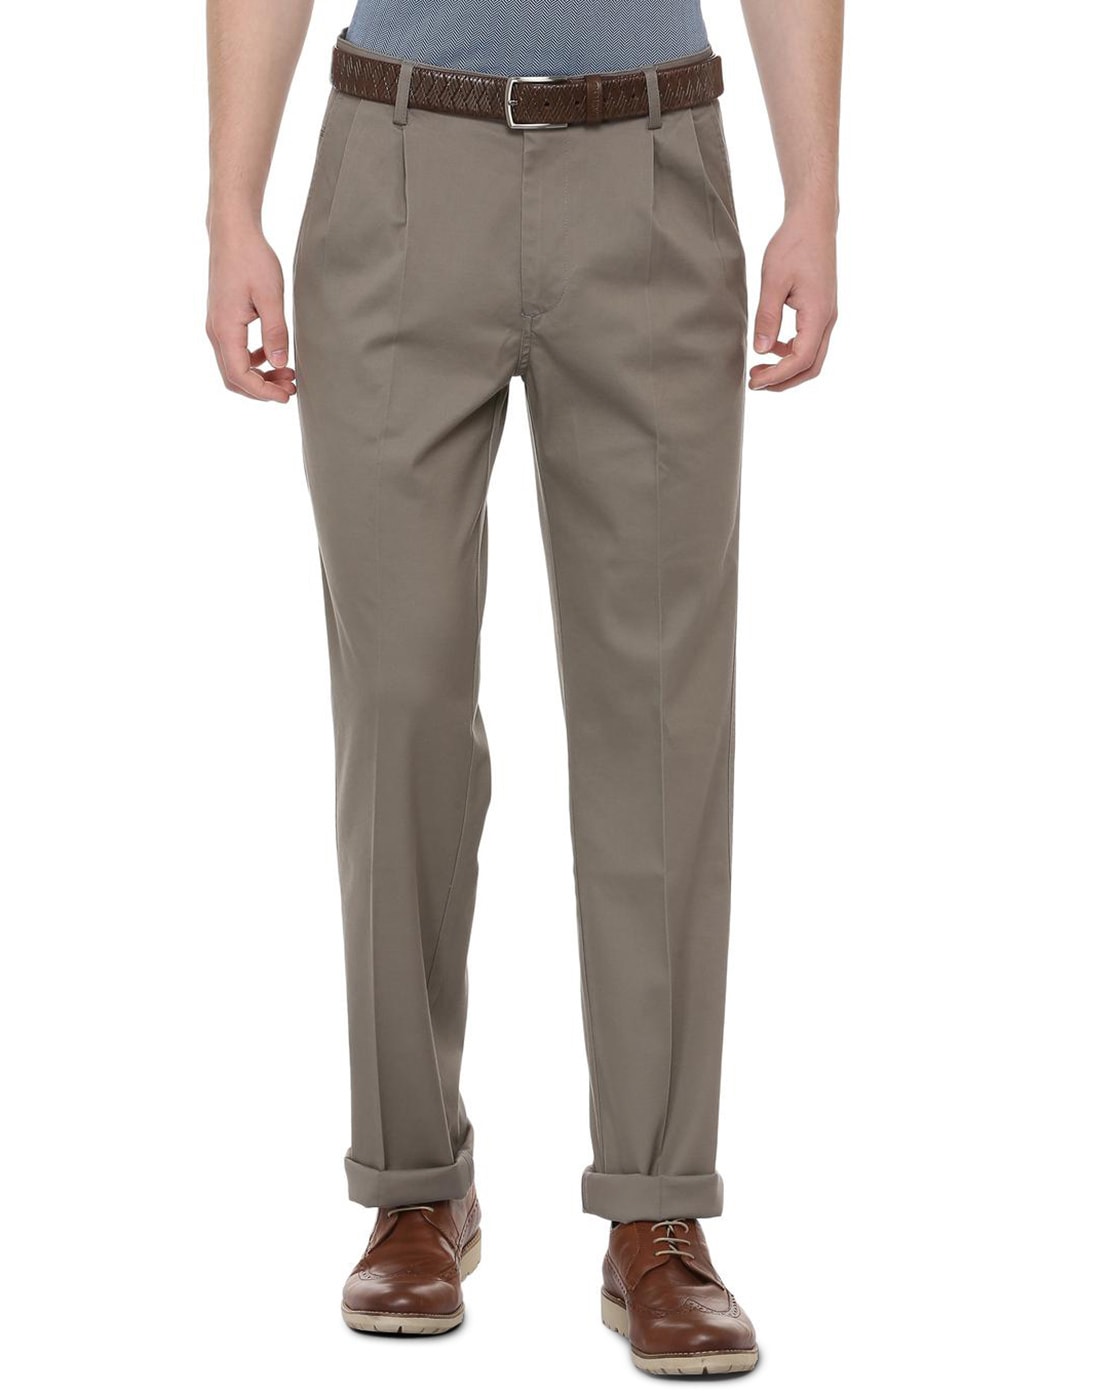 Allen Solly Cream Formal Trousers - Buy Allen Solly Cream Formal Trousers  Online at Best Prices in India on Snapdeal